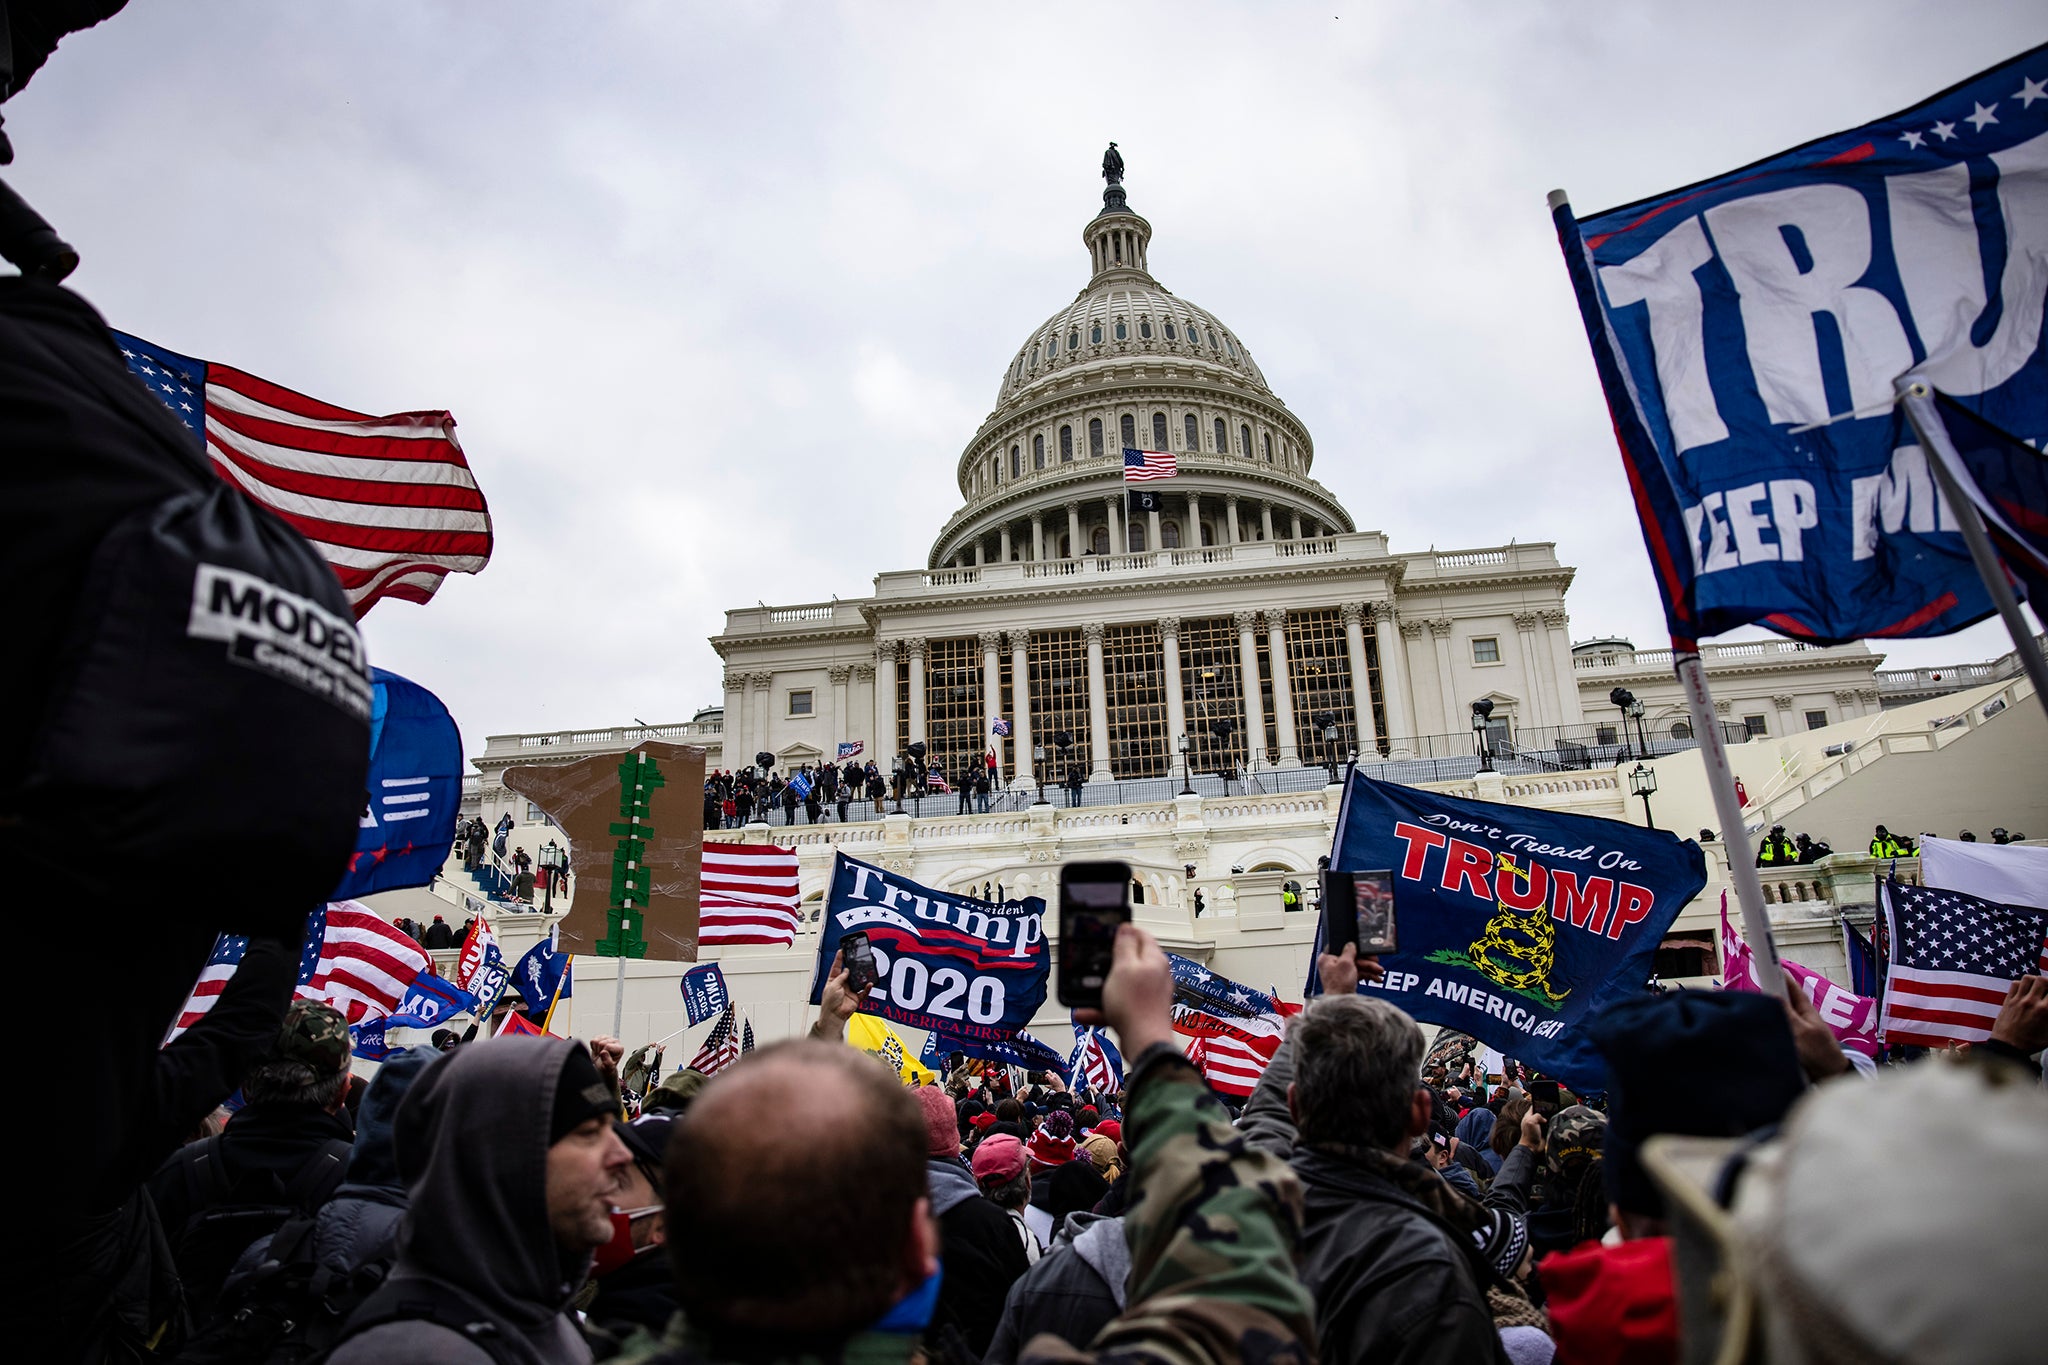 Pro-Trump supporters storm the US Capitol following a rally with President Donald Trump on January 6, 2021 in Washington, DC